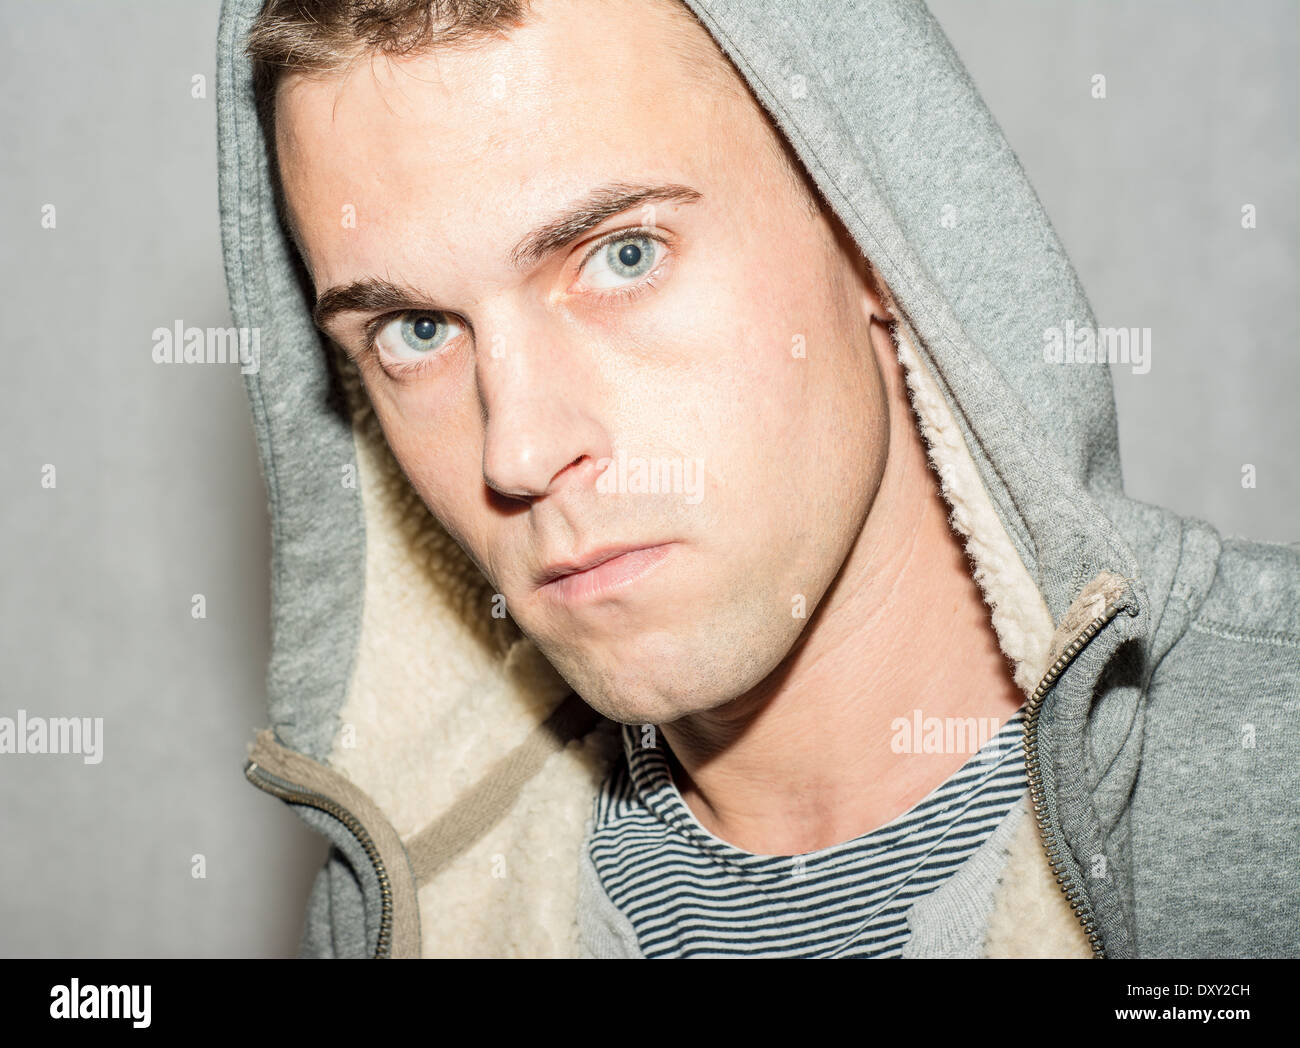 Moody male wearing hooded top Stock Photo